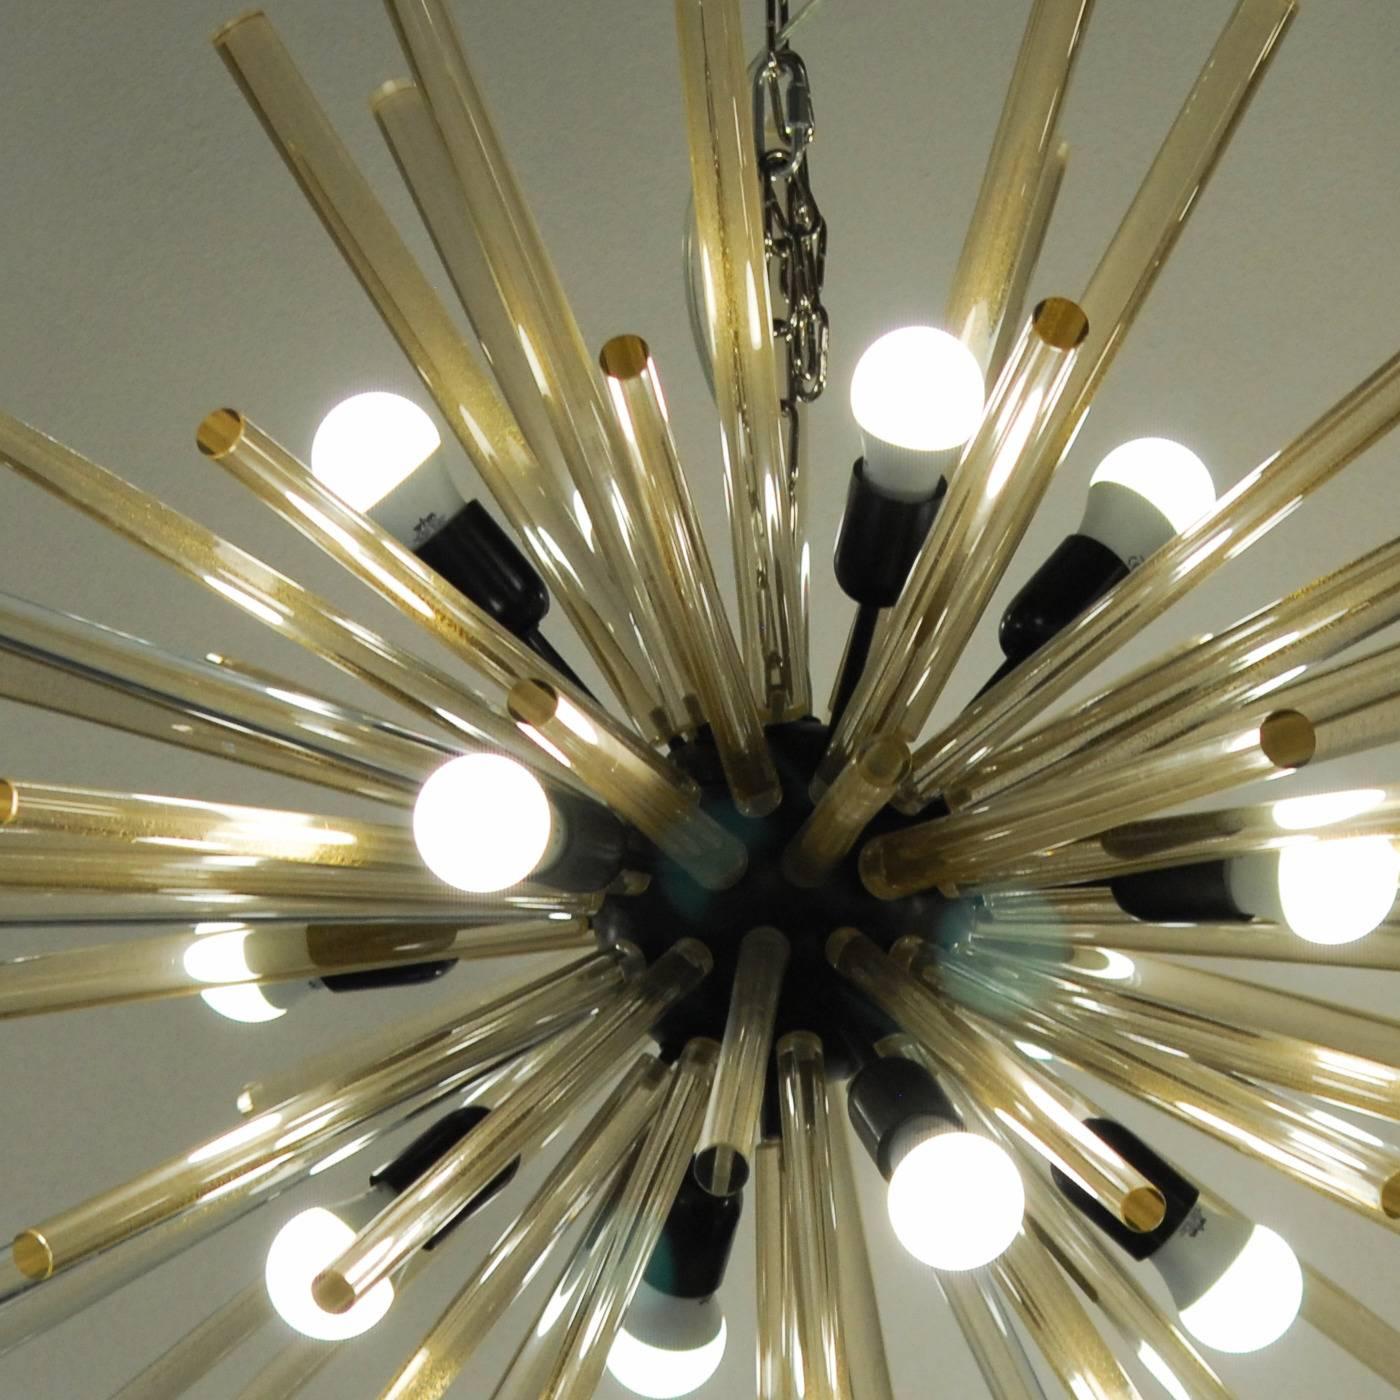 Luxurious and magnificent Mid-Century style sputnik chandelier. Murano glass hand-pulled rods embedded with pure gold leaf made at Alberto Donà’s factory. Imposing chandelier. Black hardware with gold leaf hand pulled glass rods. The quintessential